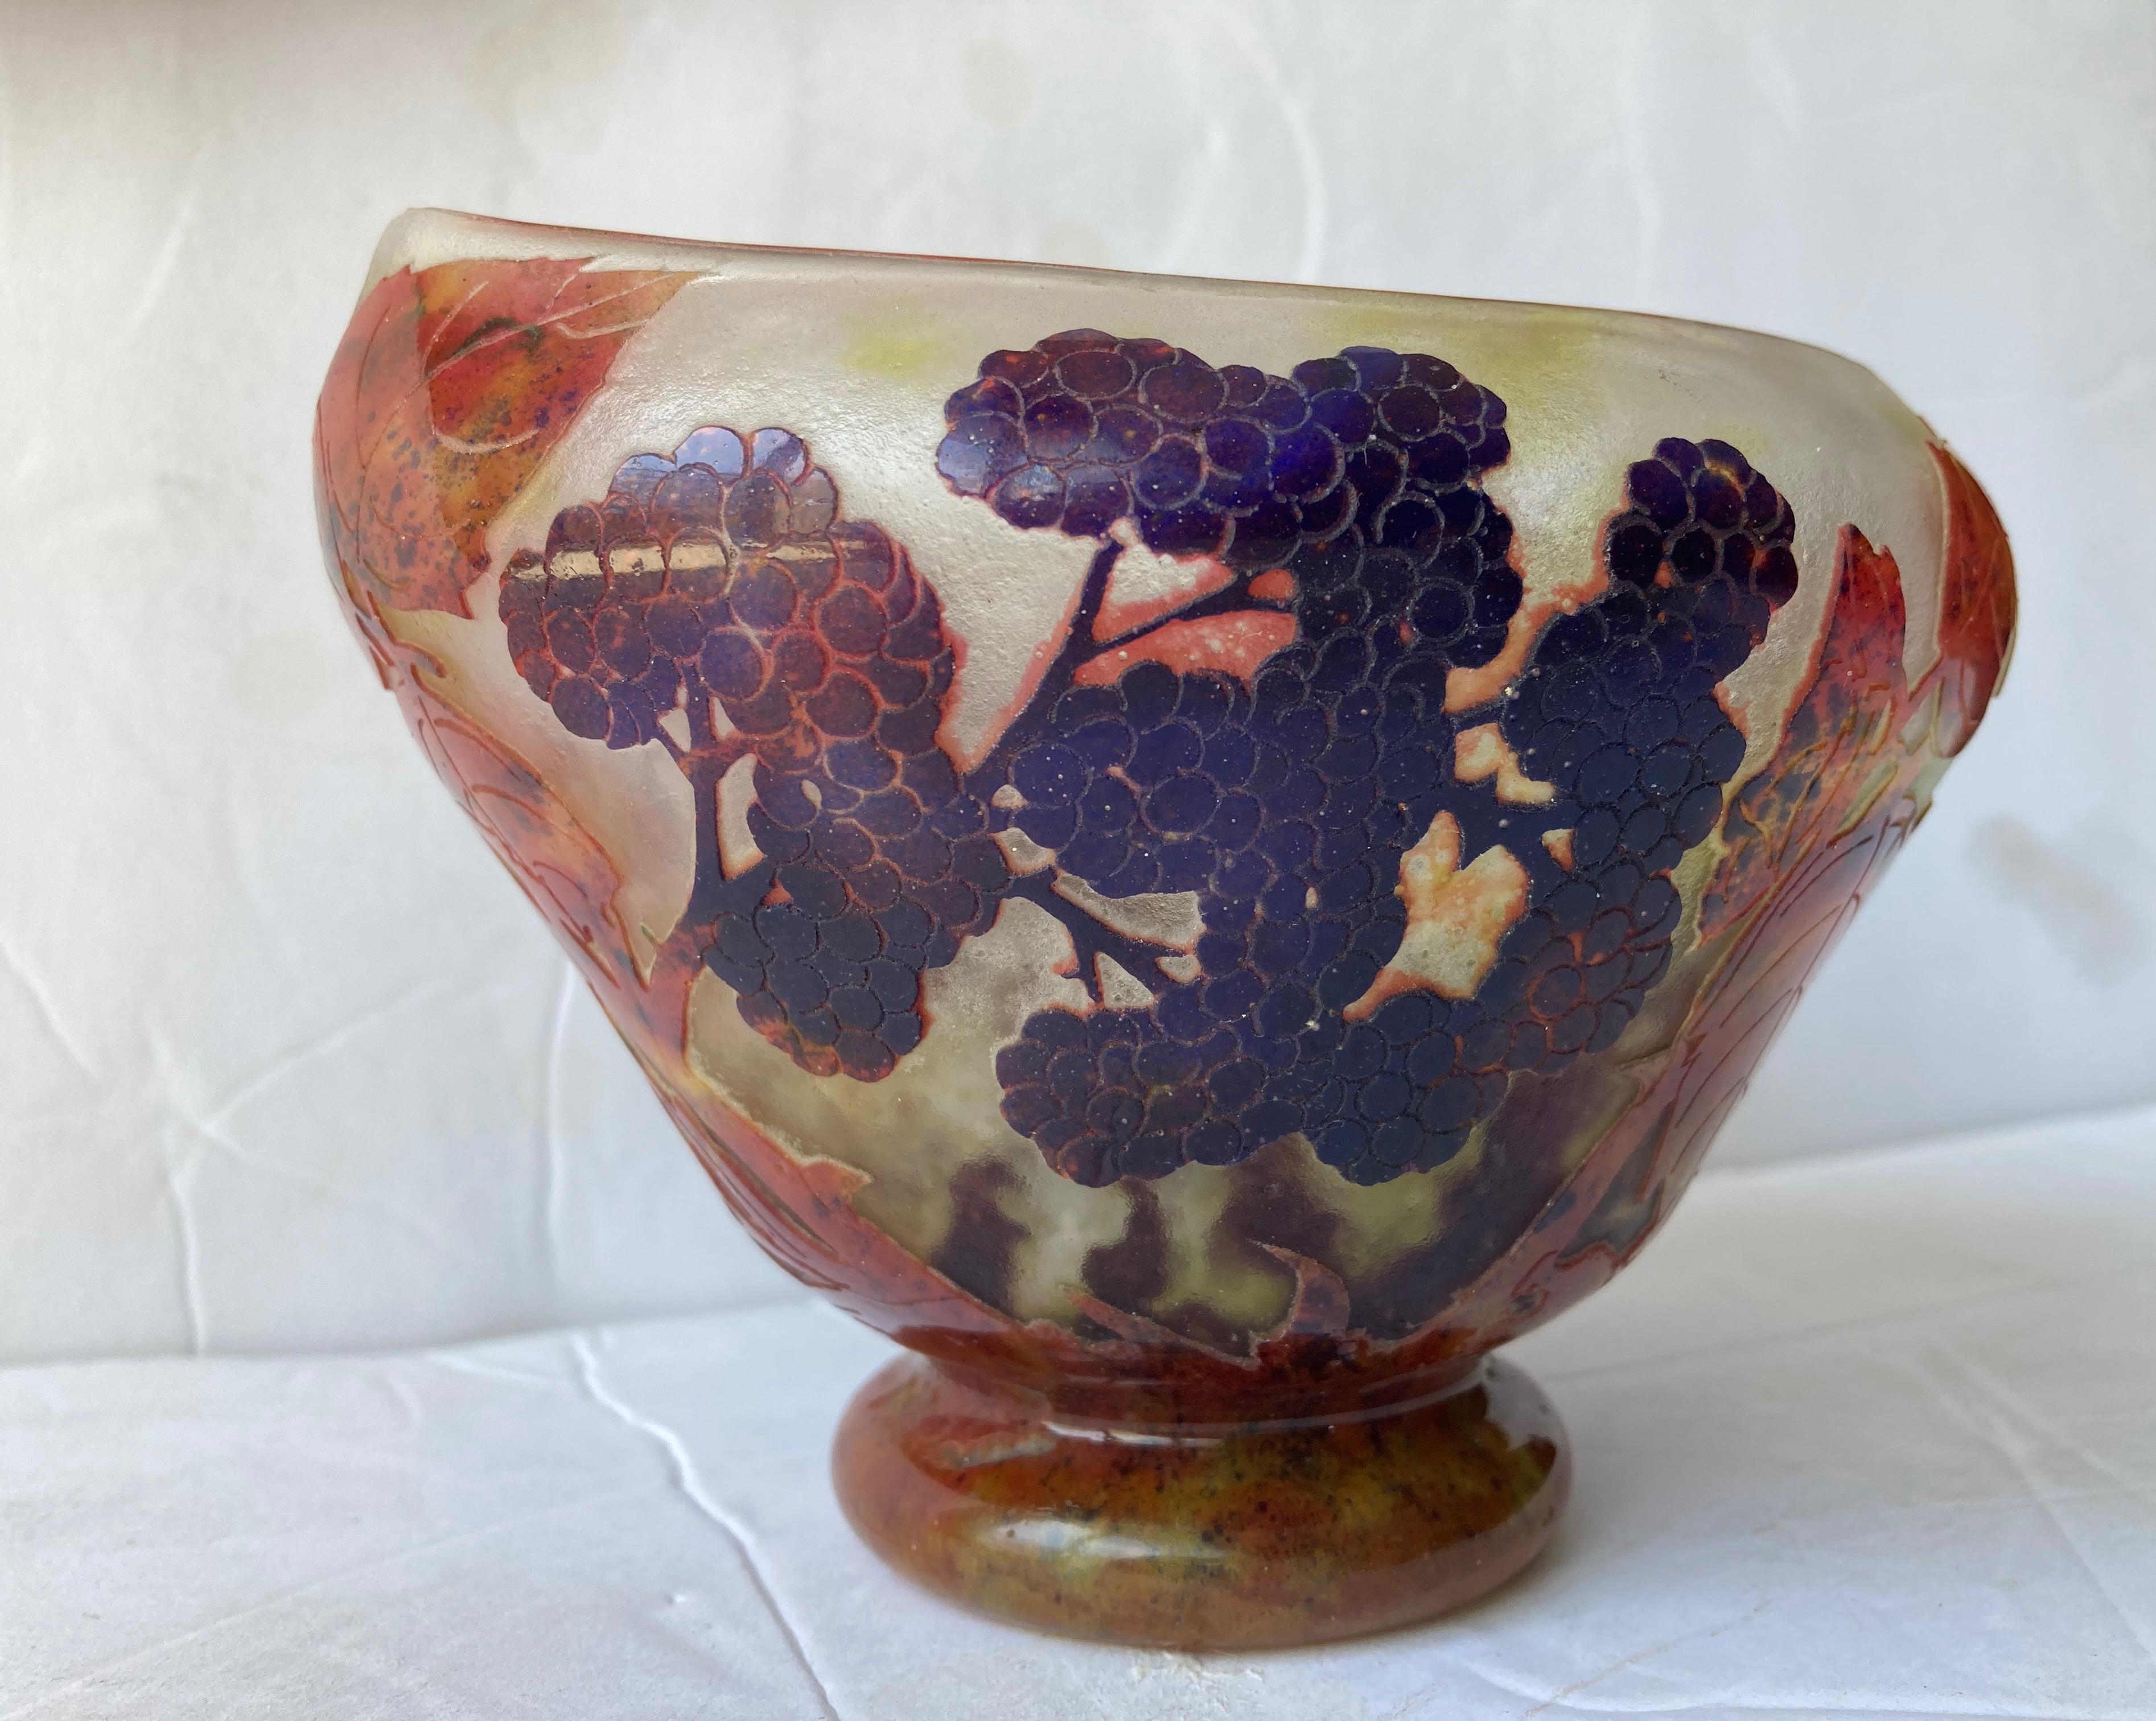 This is a beautiful sample of the art glass in France from the 19th to the early 20th century by the Daum Freres. Great traditional boat vase/footed bowl shape. Plus marked with the Croix De Lorraine.